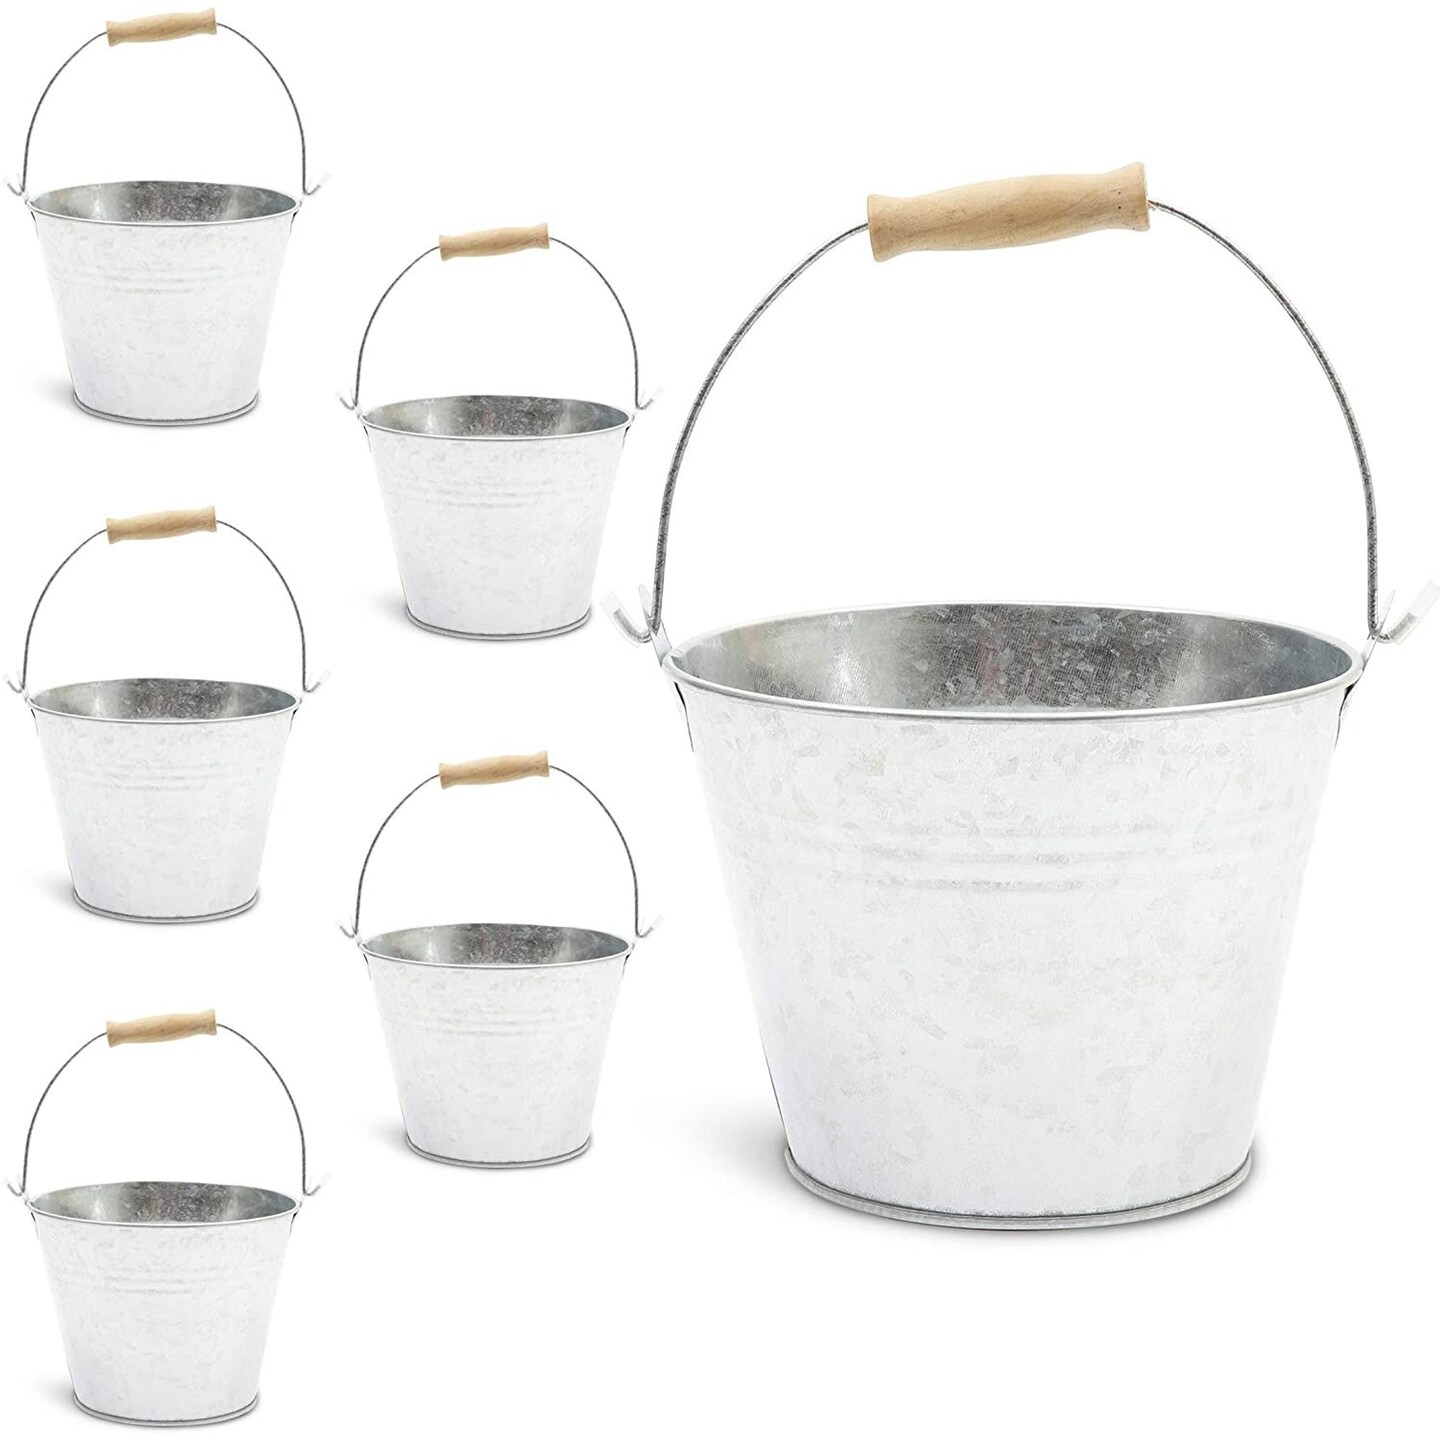 Six Galvanized Metal Buckets with Wooden Handles for Parties, Home Projects, and More (4.5 in; not to be used as water buckets)